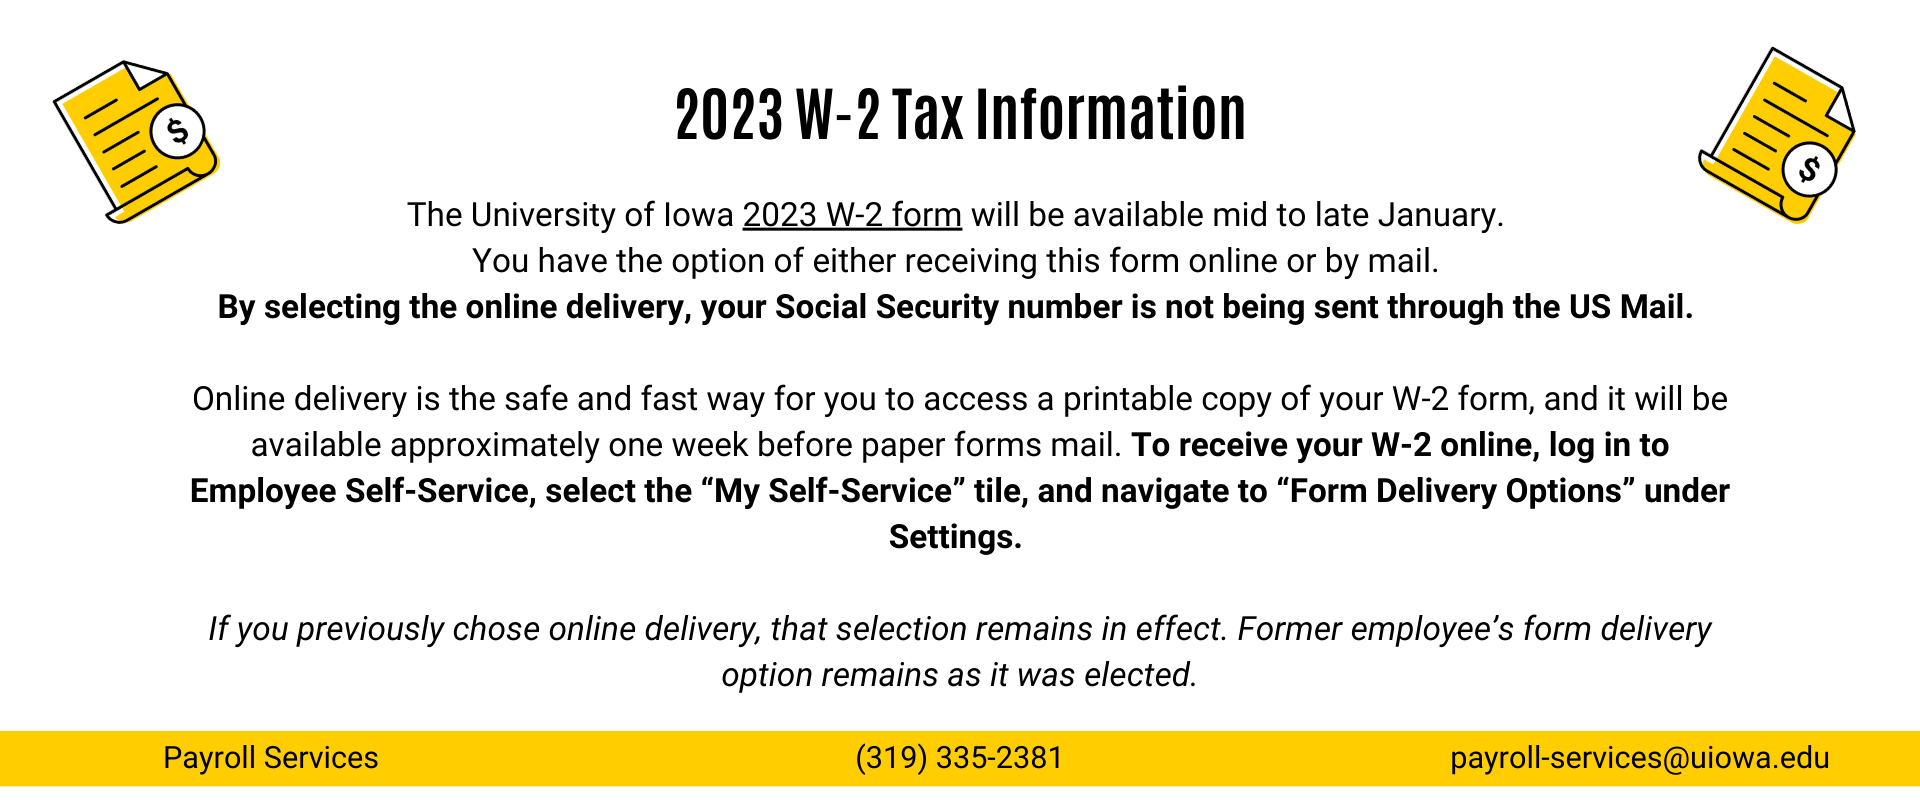 Tax information from payroll